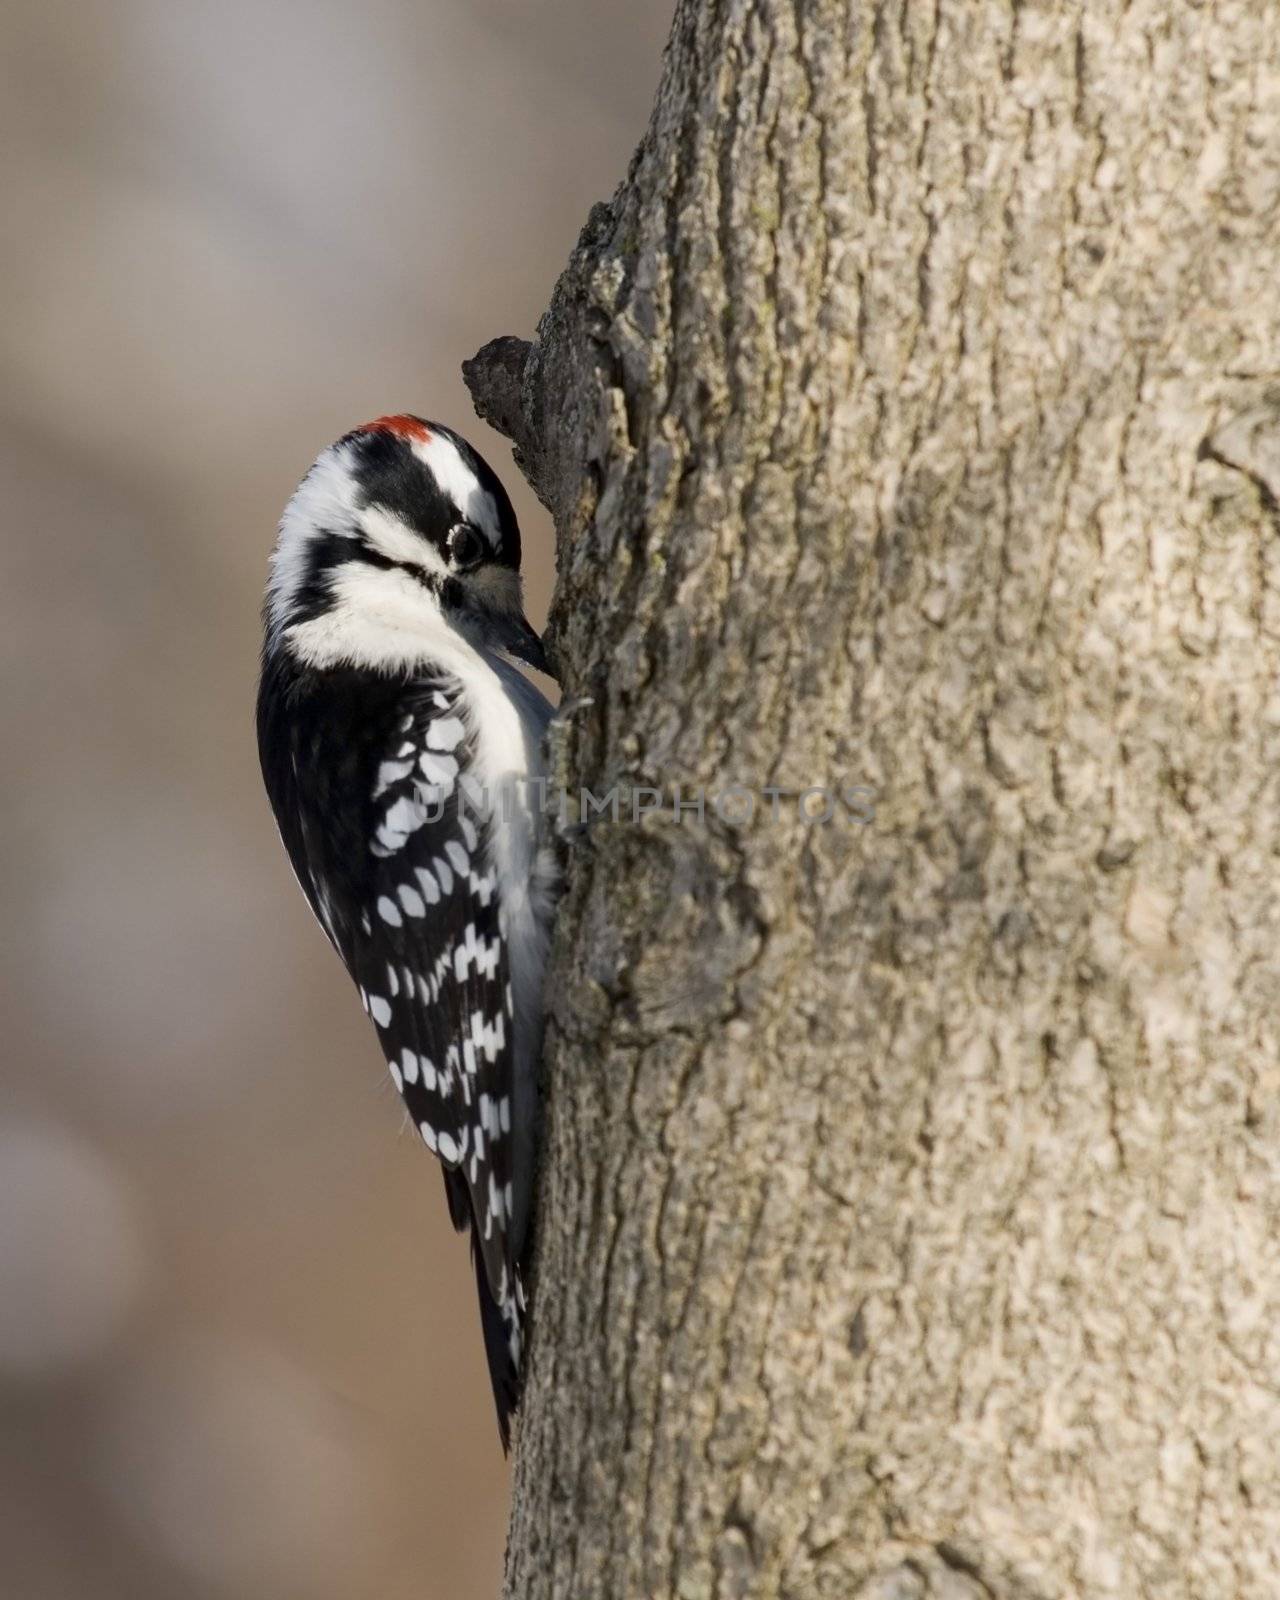 Downy Woodpecker (Picoides pubescens) by brm1949